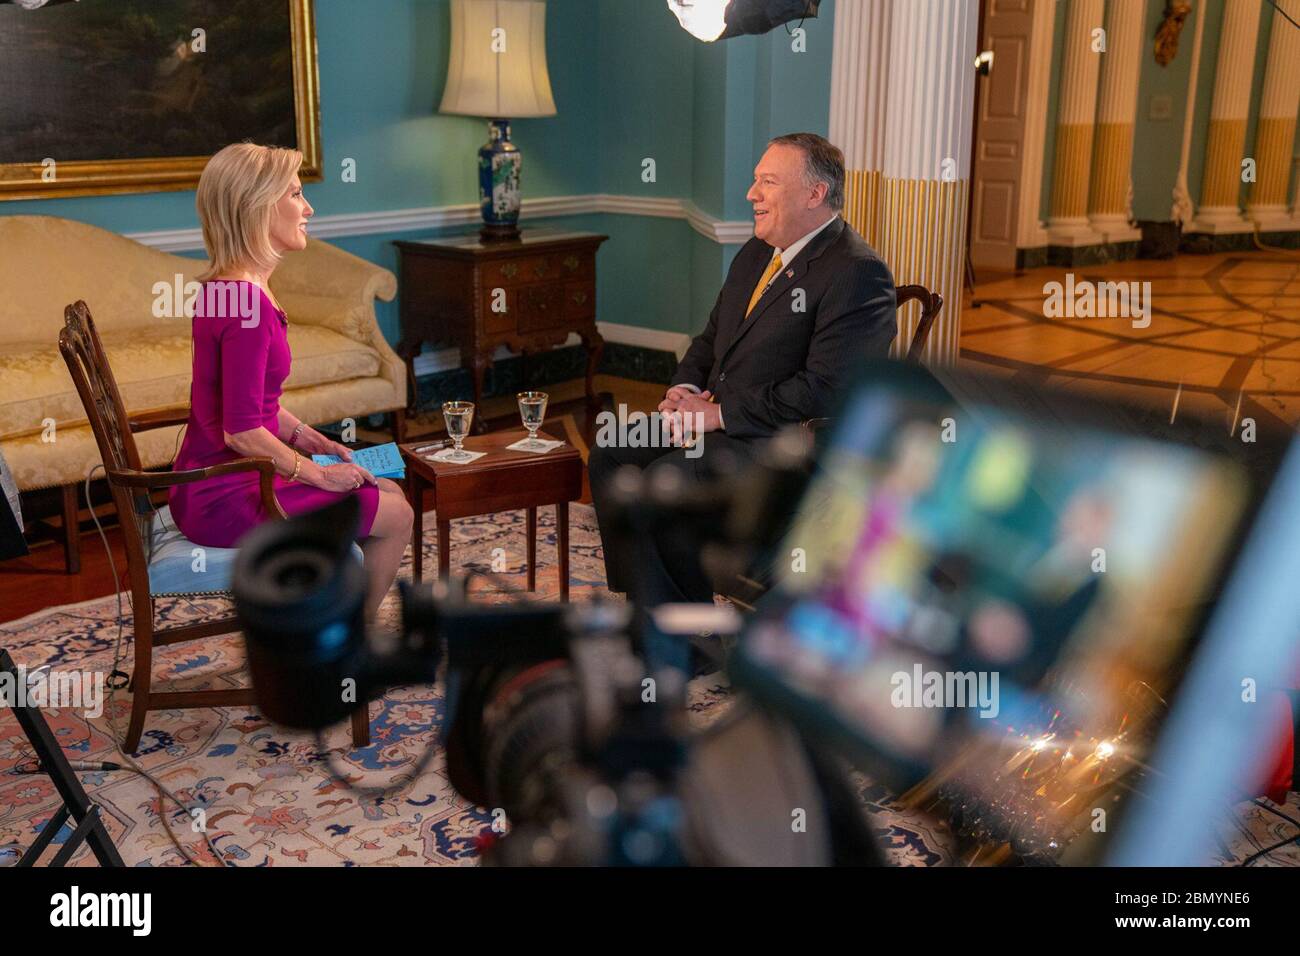 Secretary Pompeo Participates in an Interview with Fox Secretary of State Michael R. Pompeo participates in an interview with Fox's Laura Ingraham, at the Department of State, in Washington D.C., on January 9, 2020. Stock Photo